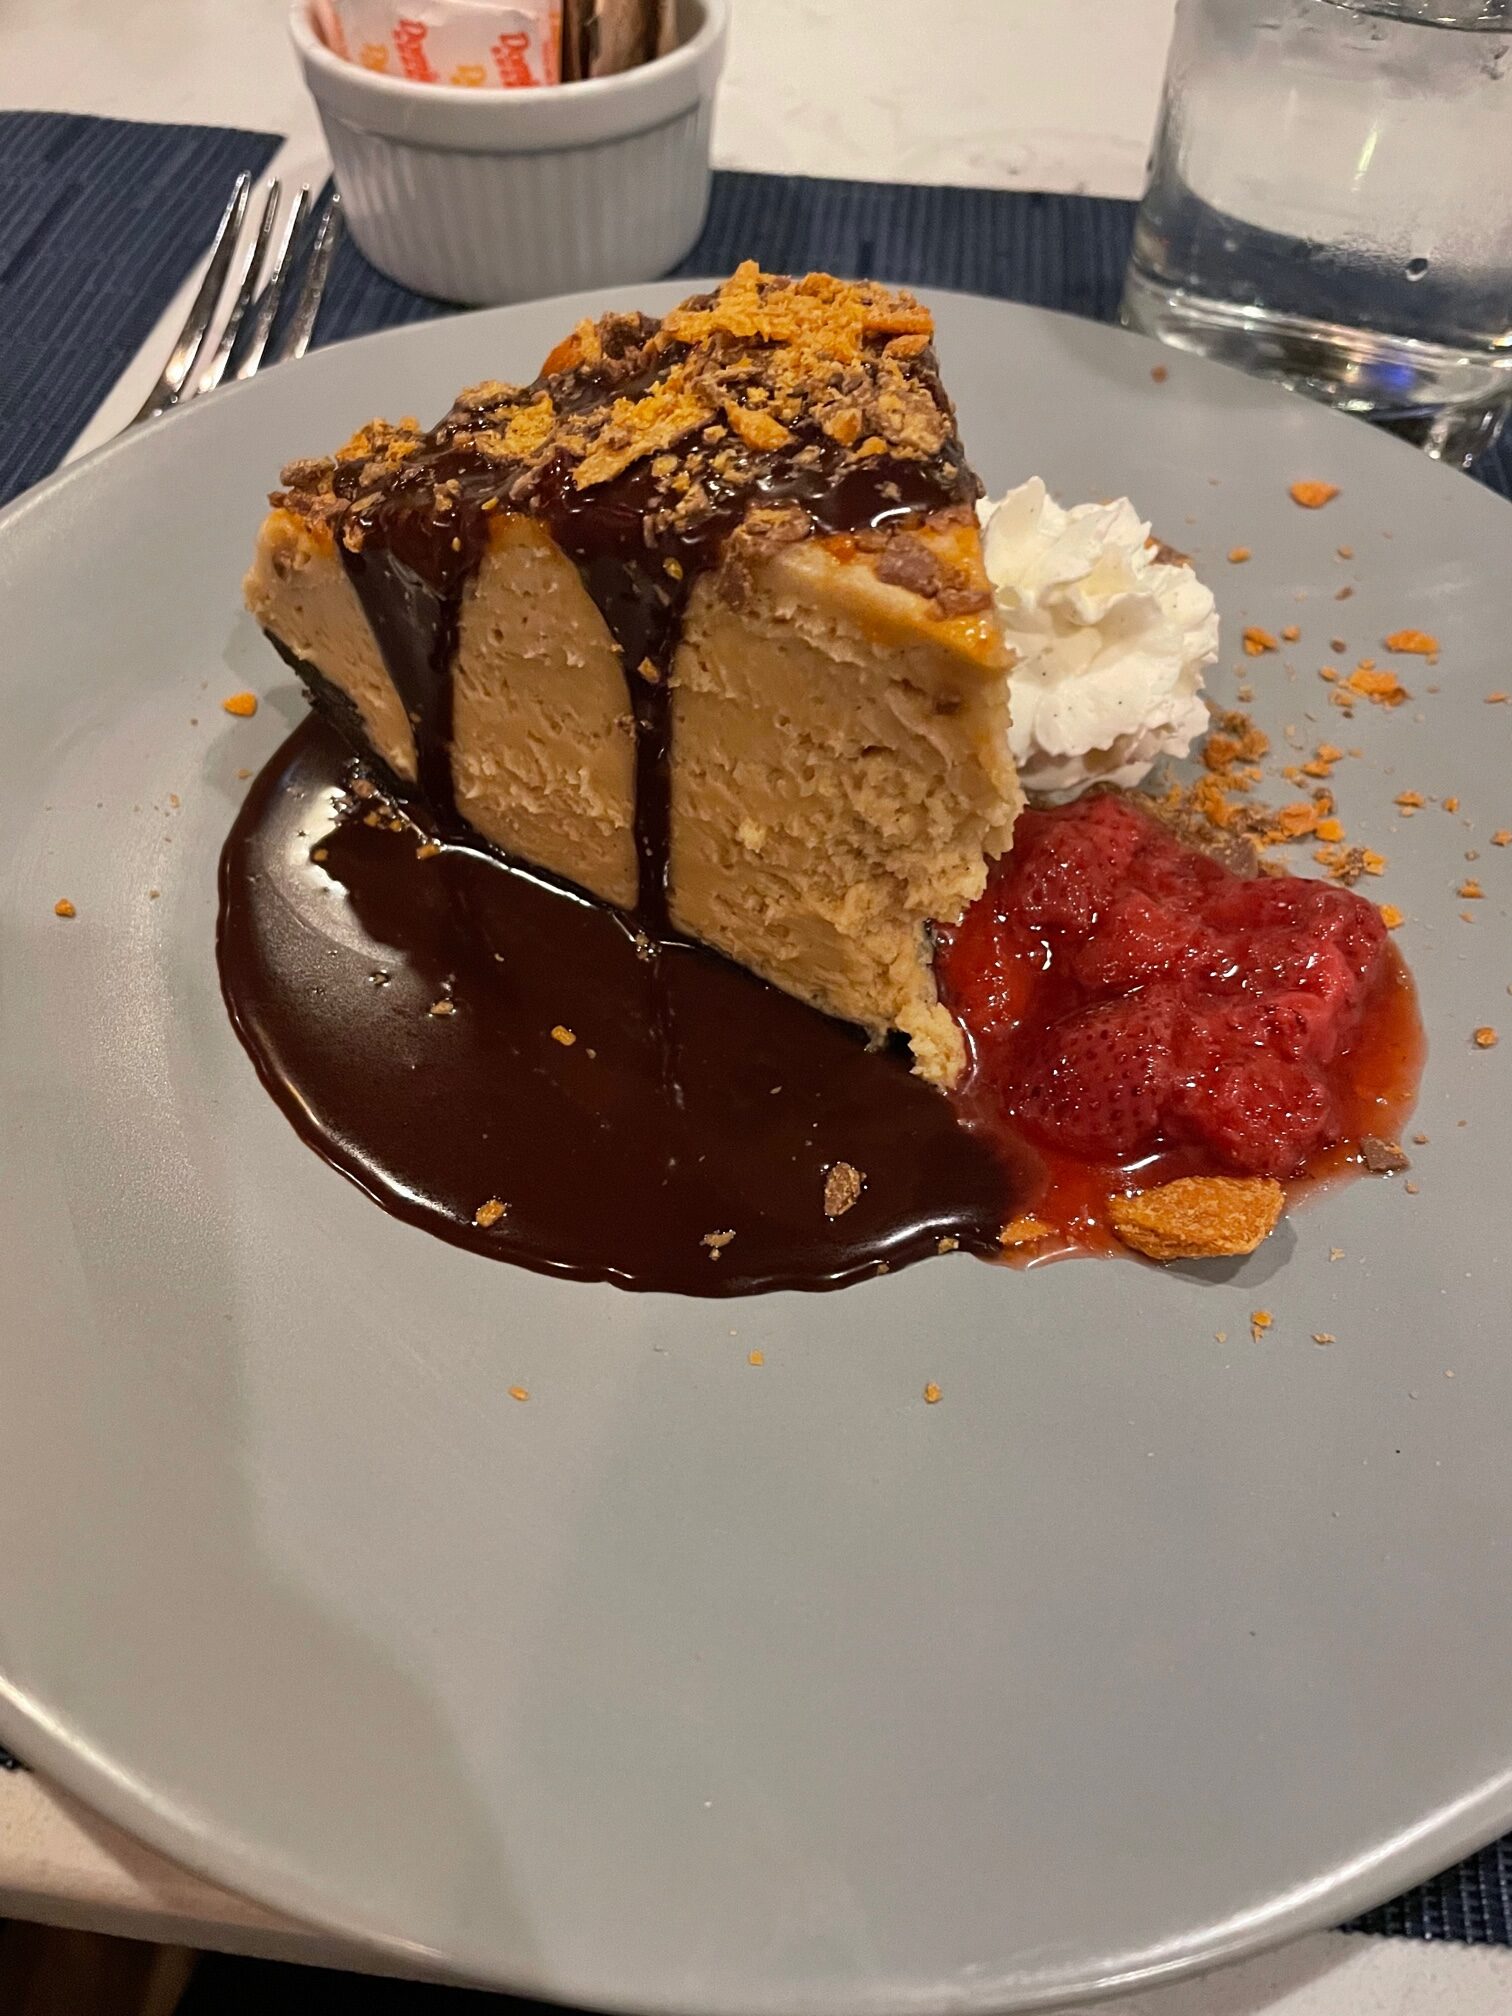 The peanut butter pie from Osteria Danny in Saratoga, NY.